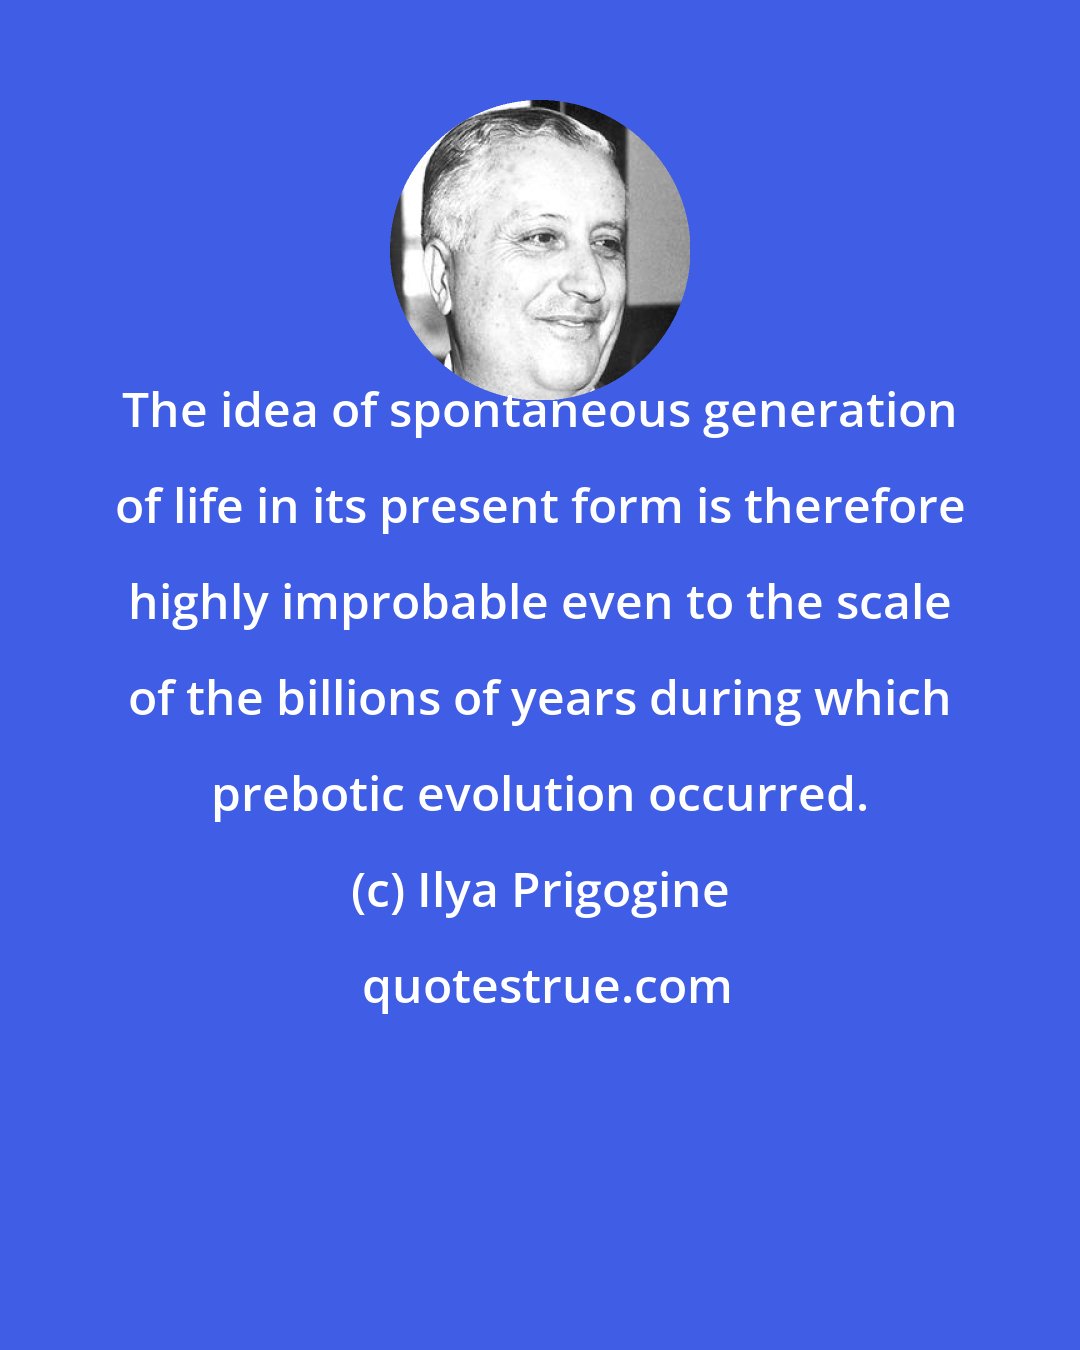 Ilya Prigogine: The idea of spontaneous generation of life in its present form is therefore highly improbable even to the scale of the billions of years during which prebotic evolution occurred.